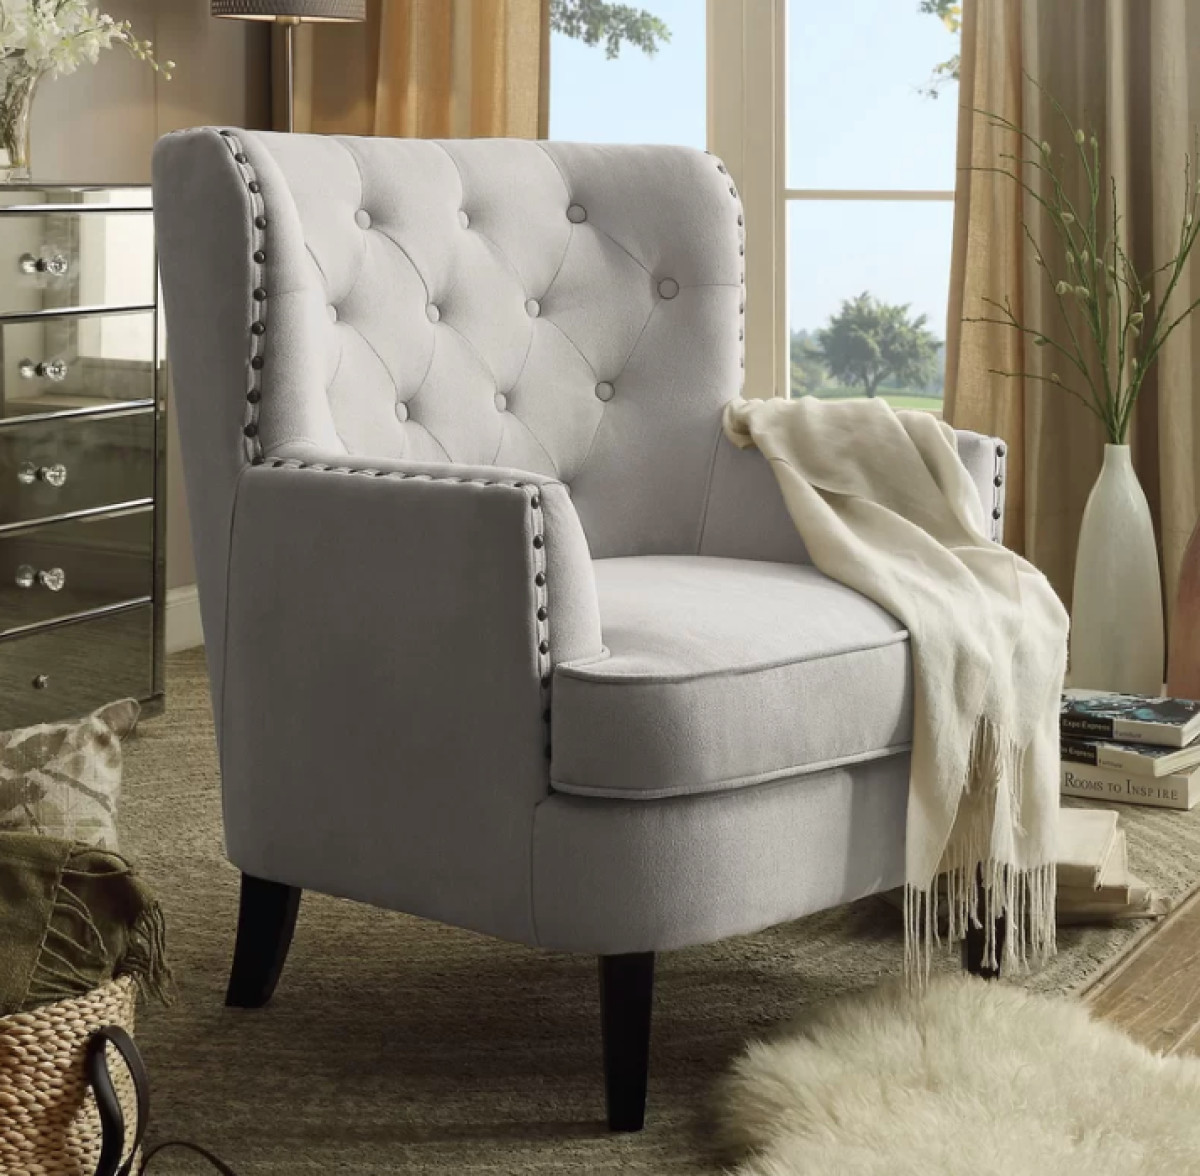 Farmhouse Living Room Chairs
 Wayfair End of Year Clearance Sale = Up to f Living